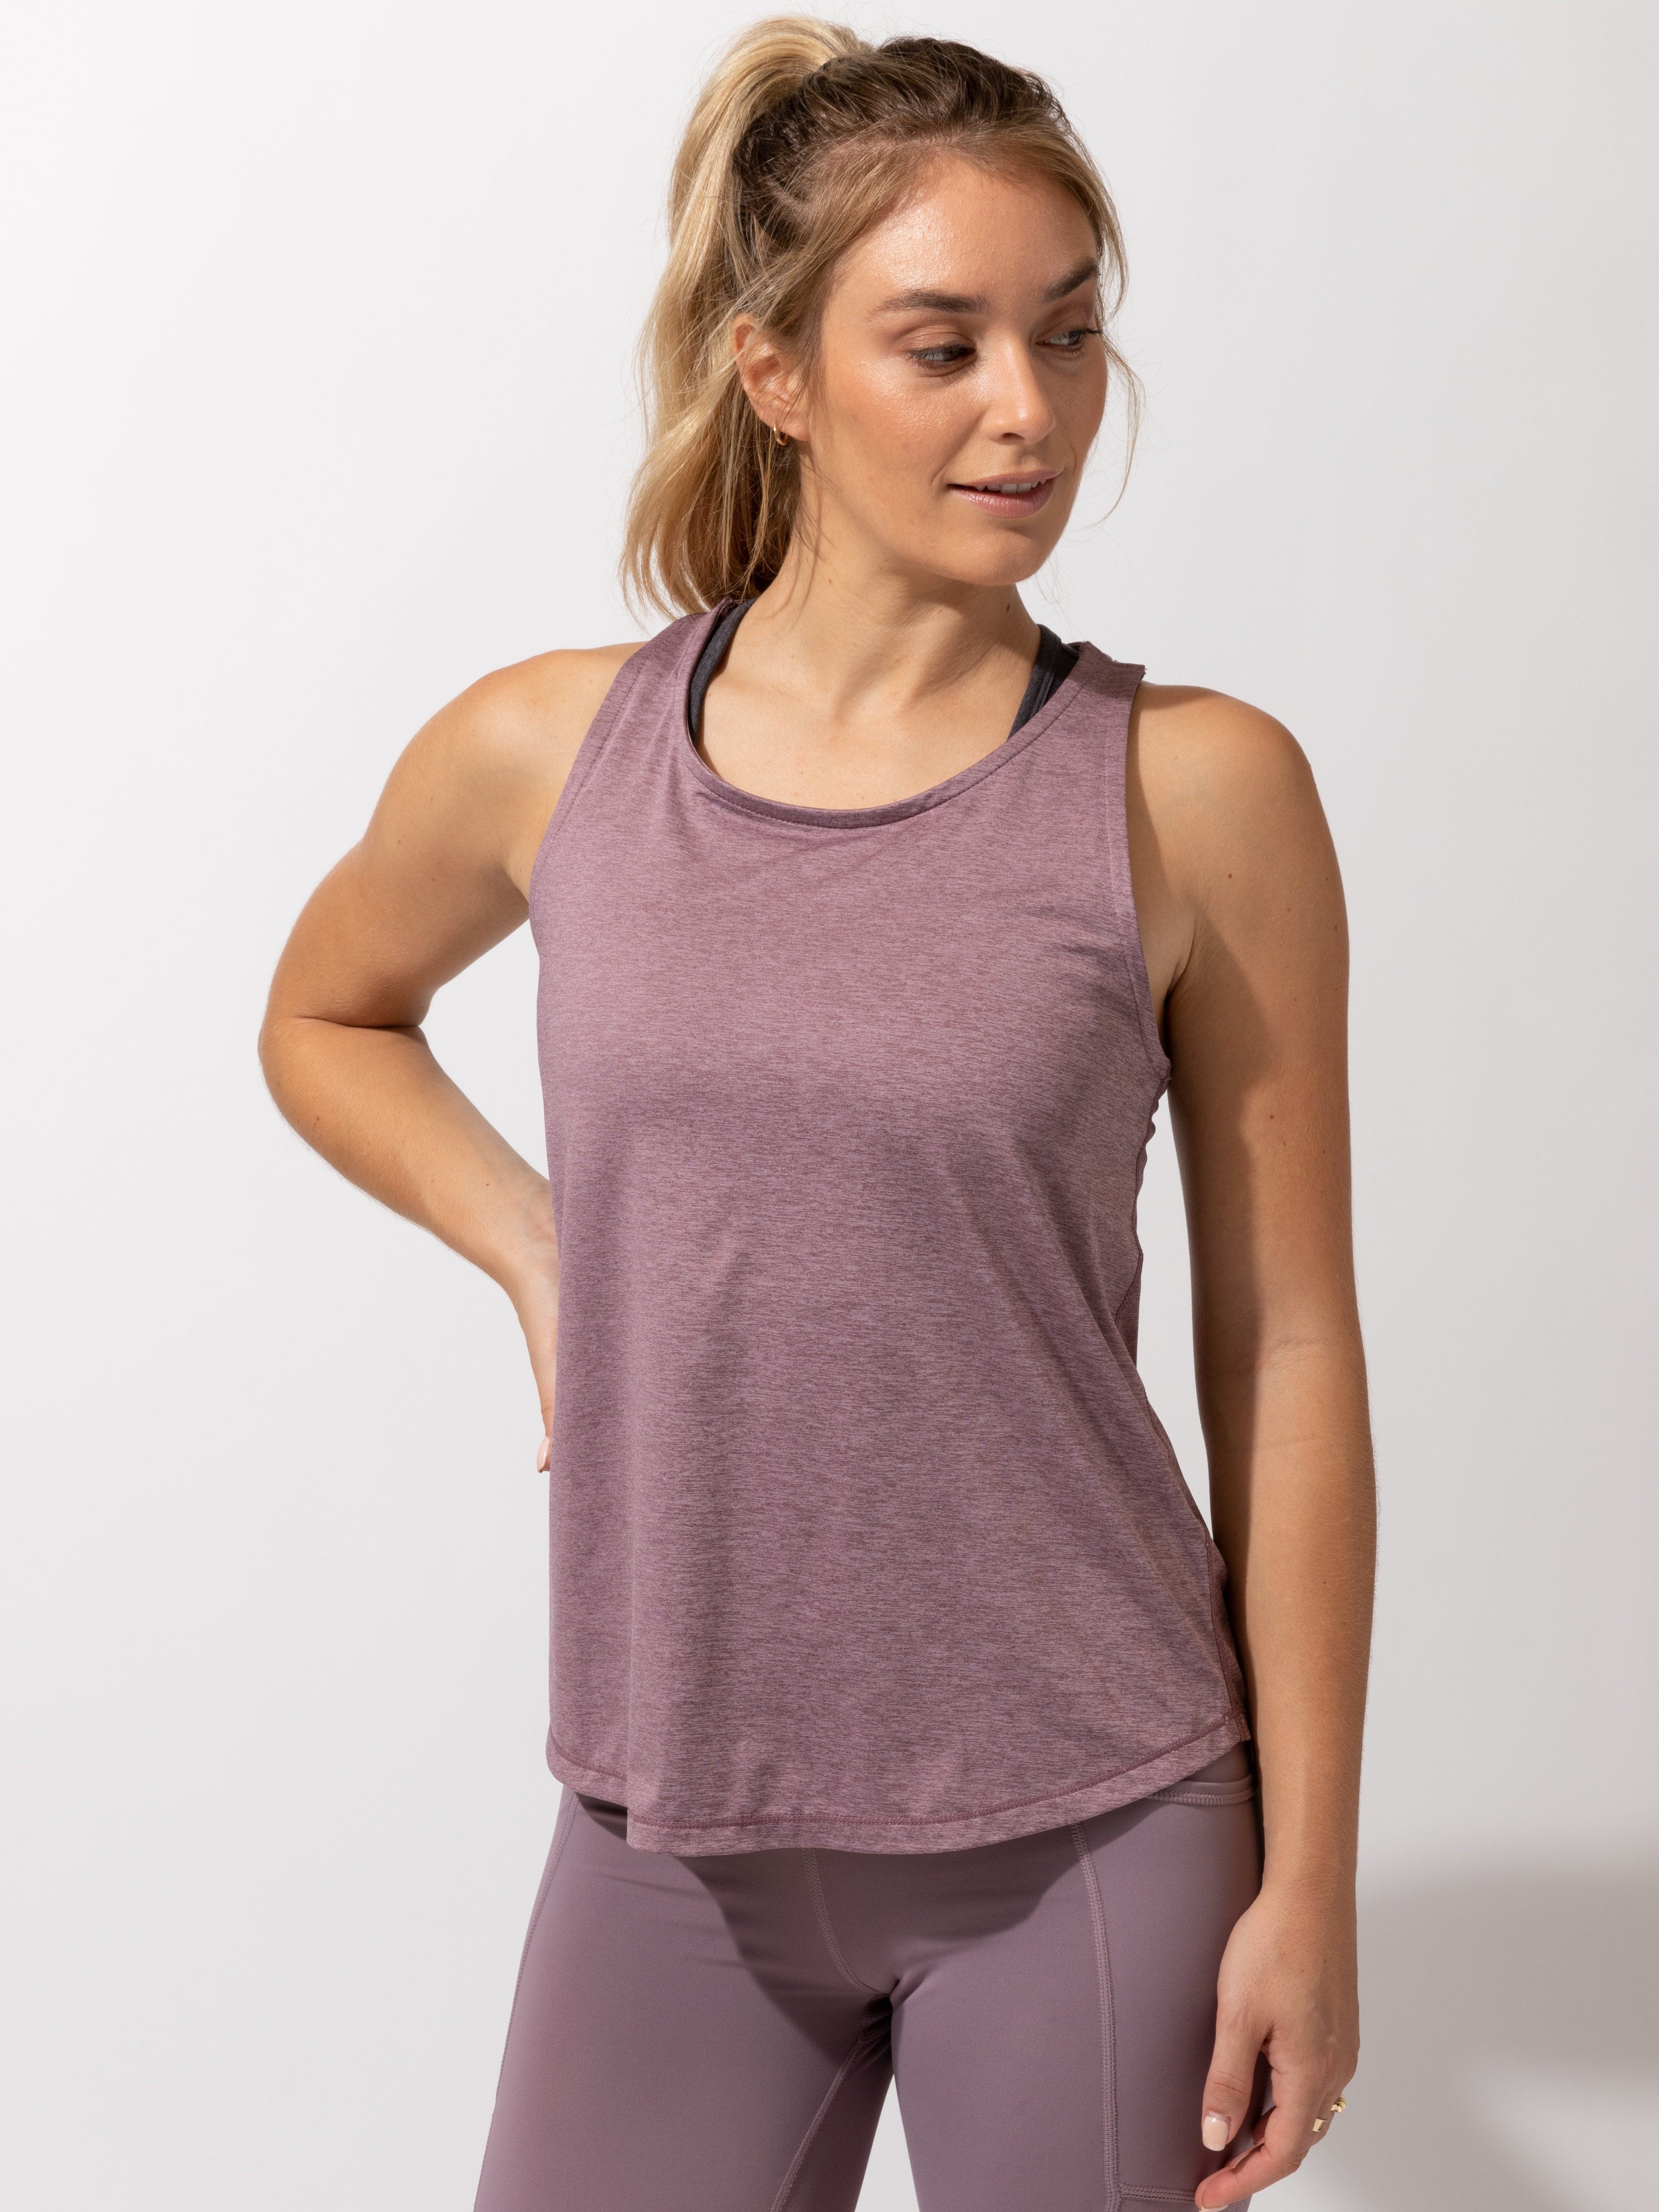 Strappy Tank Womens Tops Tanks Threads 4 Thought 